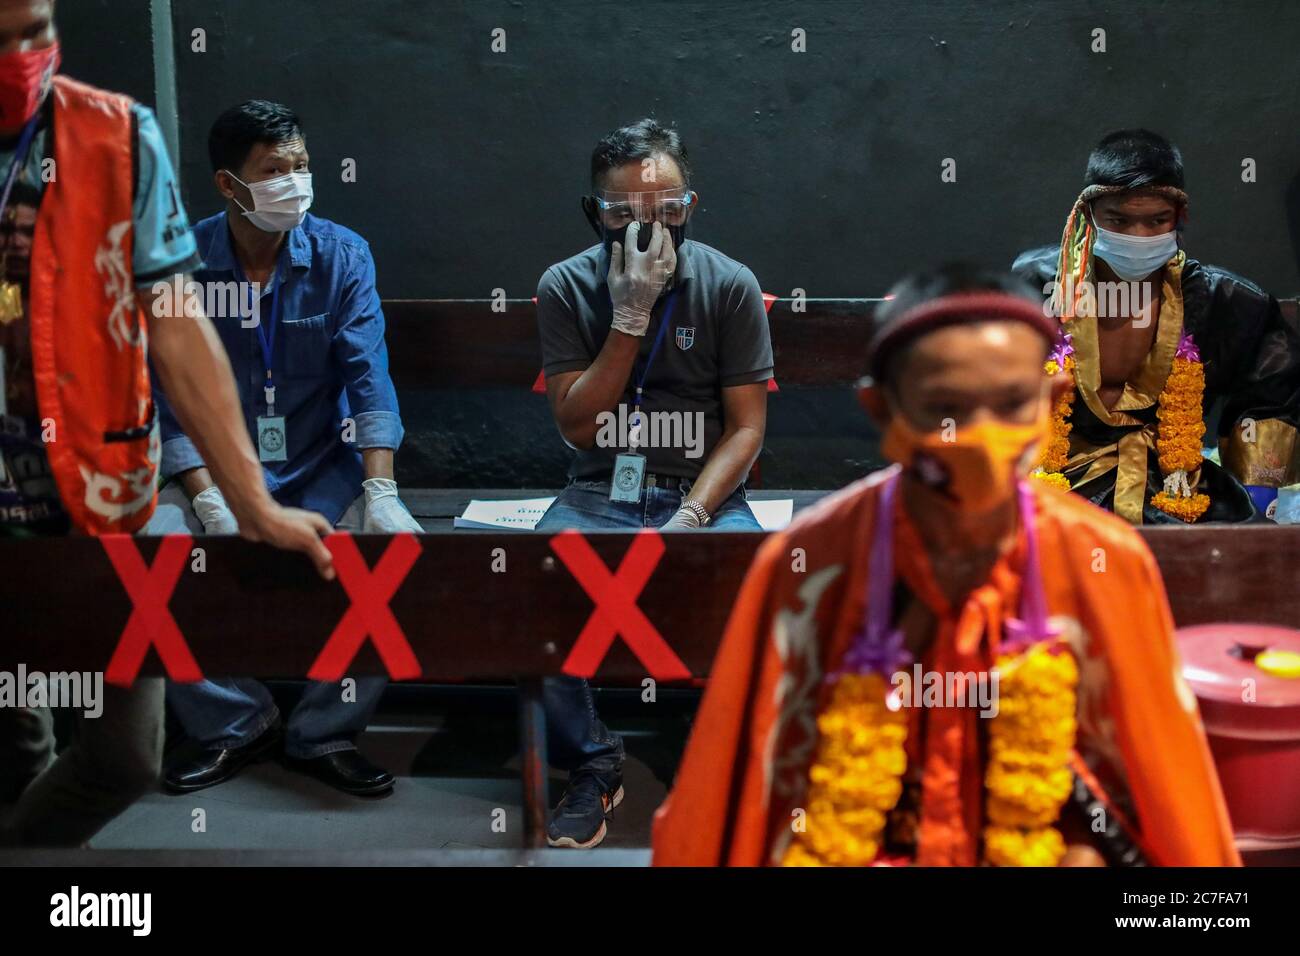 Pranakorn, Thailand. 15th July, 2020. Trainers wearing face masks are seen at the backstage during the Thai Boxing match that was held without spectators as a preventive measure against the spread of COVID-19 coronavirus at Rajadamnern Stadium. Credit: SOPA Images Limited/Alamy Live News Stock Photo